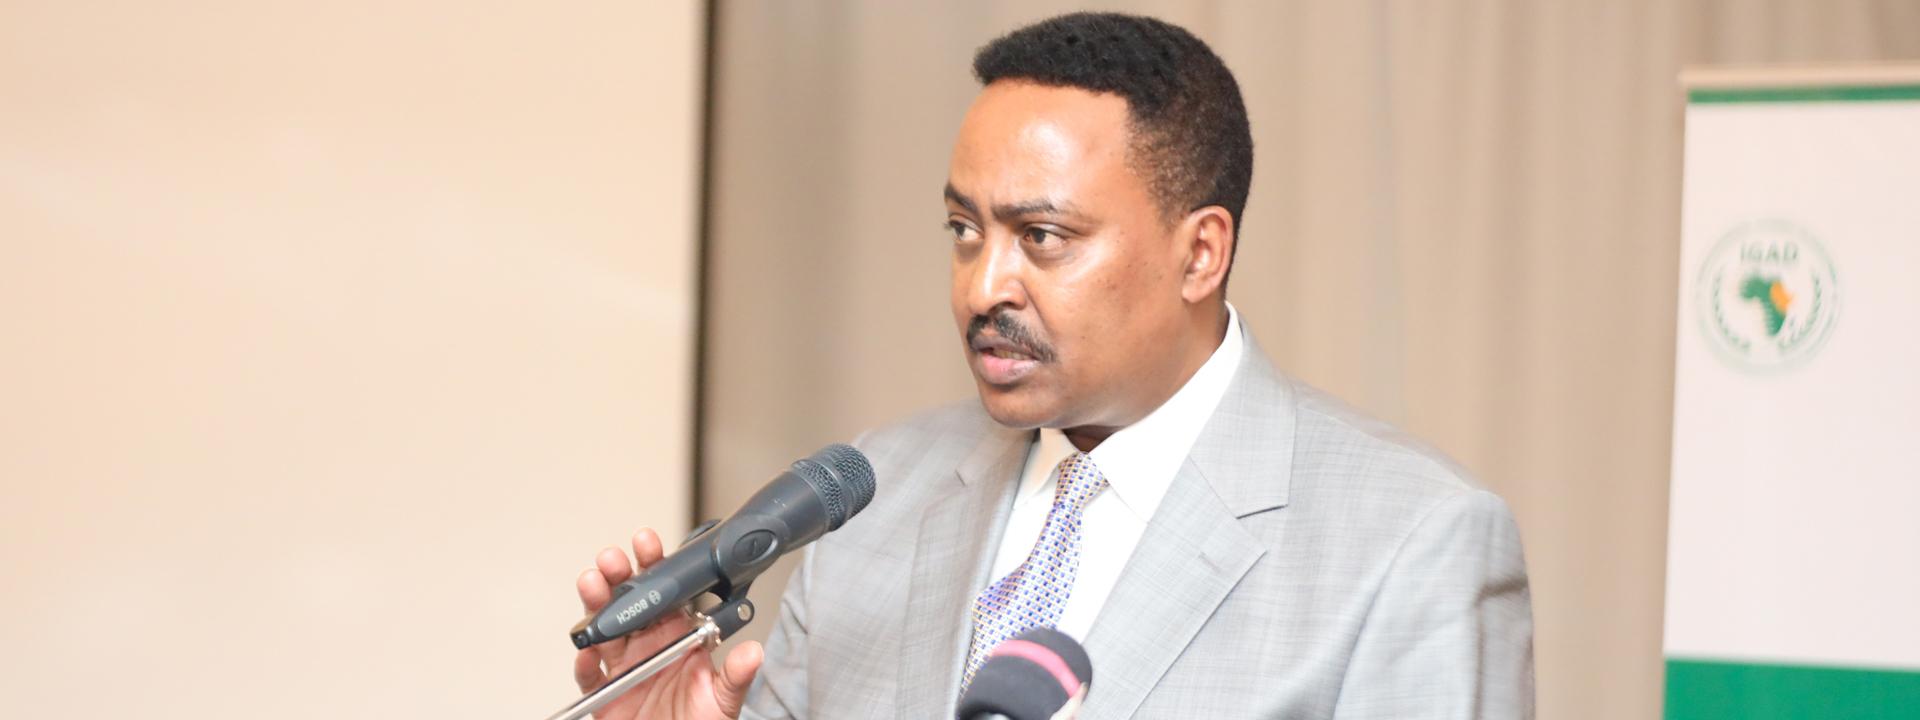 Talking Points by IGAD Executive Secretary Dr Workneh Gebeyehu IGAD National Public Media Meeting May 10, 2023